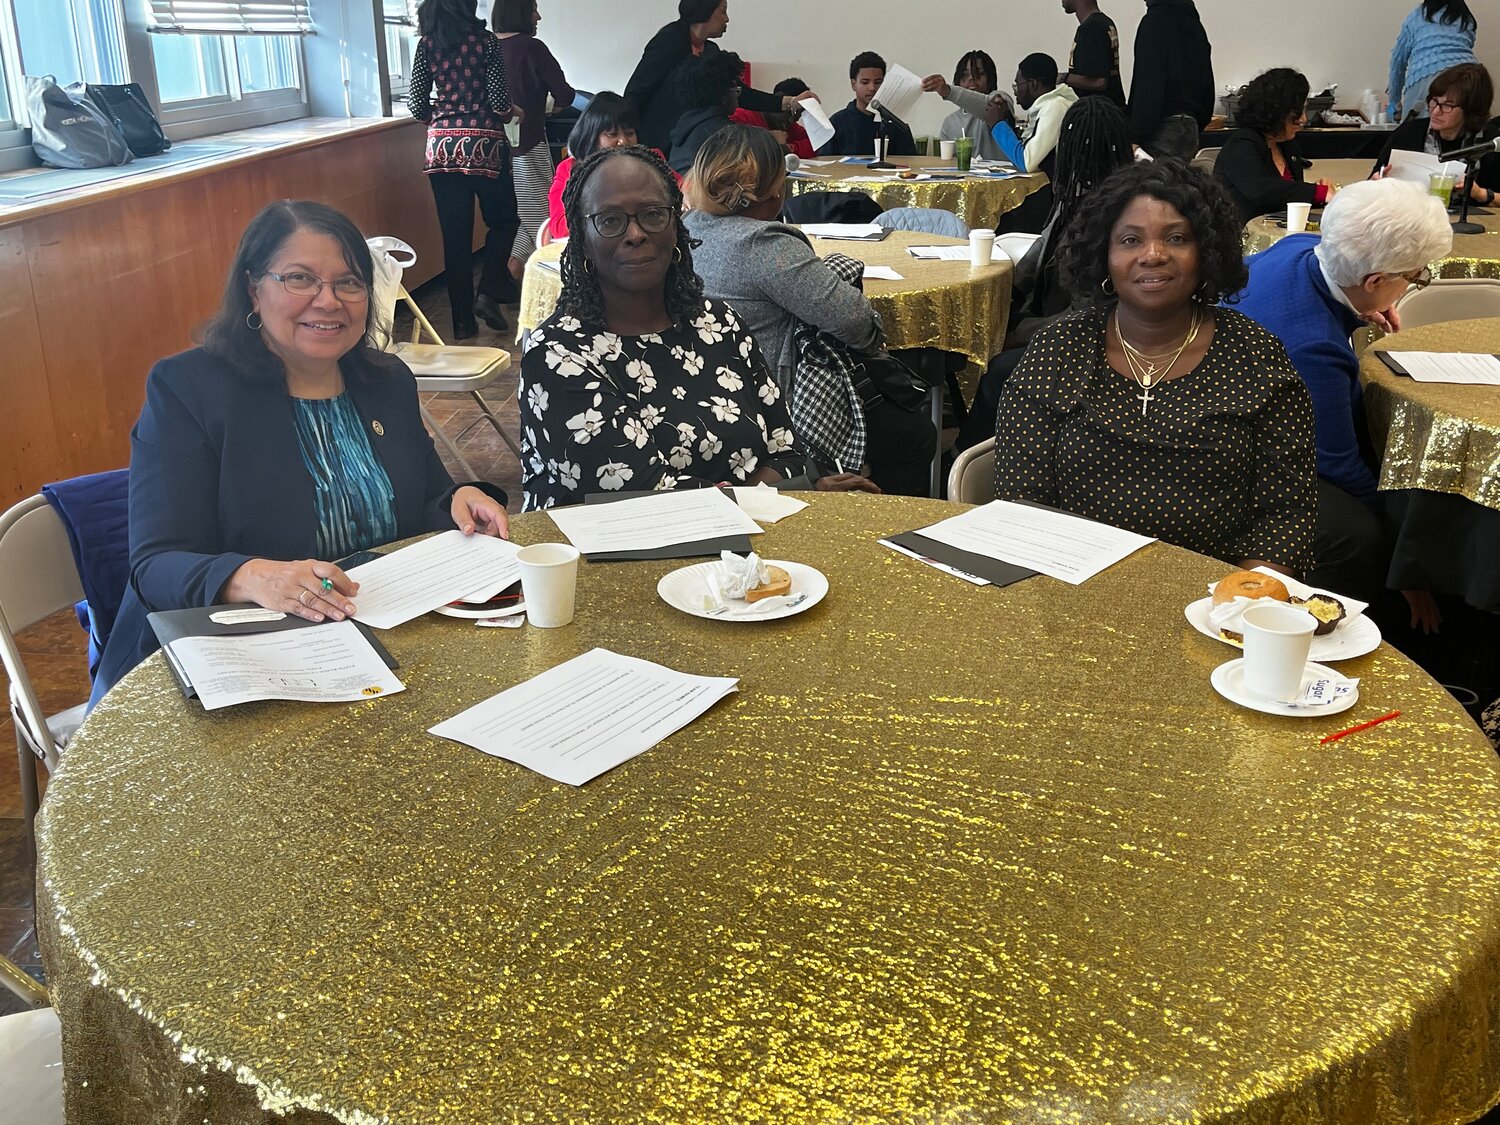 A table full of community leaders recognized by the Uniondale school district for all of their work within the neighborhood. From left: Jeannine Maynard, activist and co-facilitator for the Greater Uniondale Area Action Coalition, library trustee Deborah Mabry, and Pastor Lucie Tshama of Uniondale United Methodist Church.